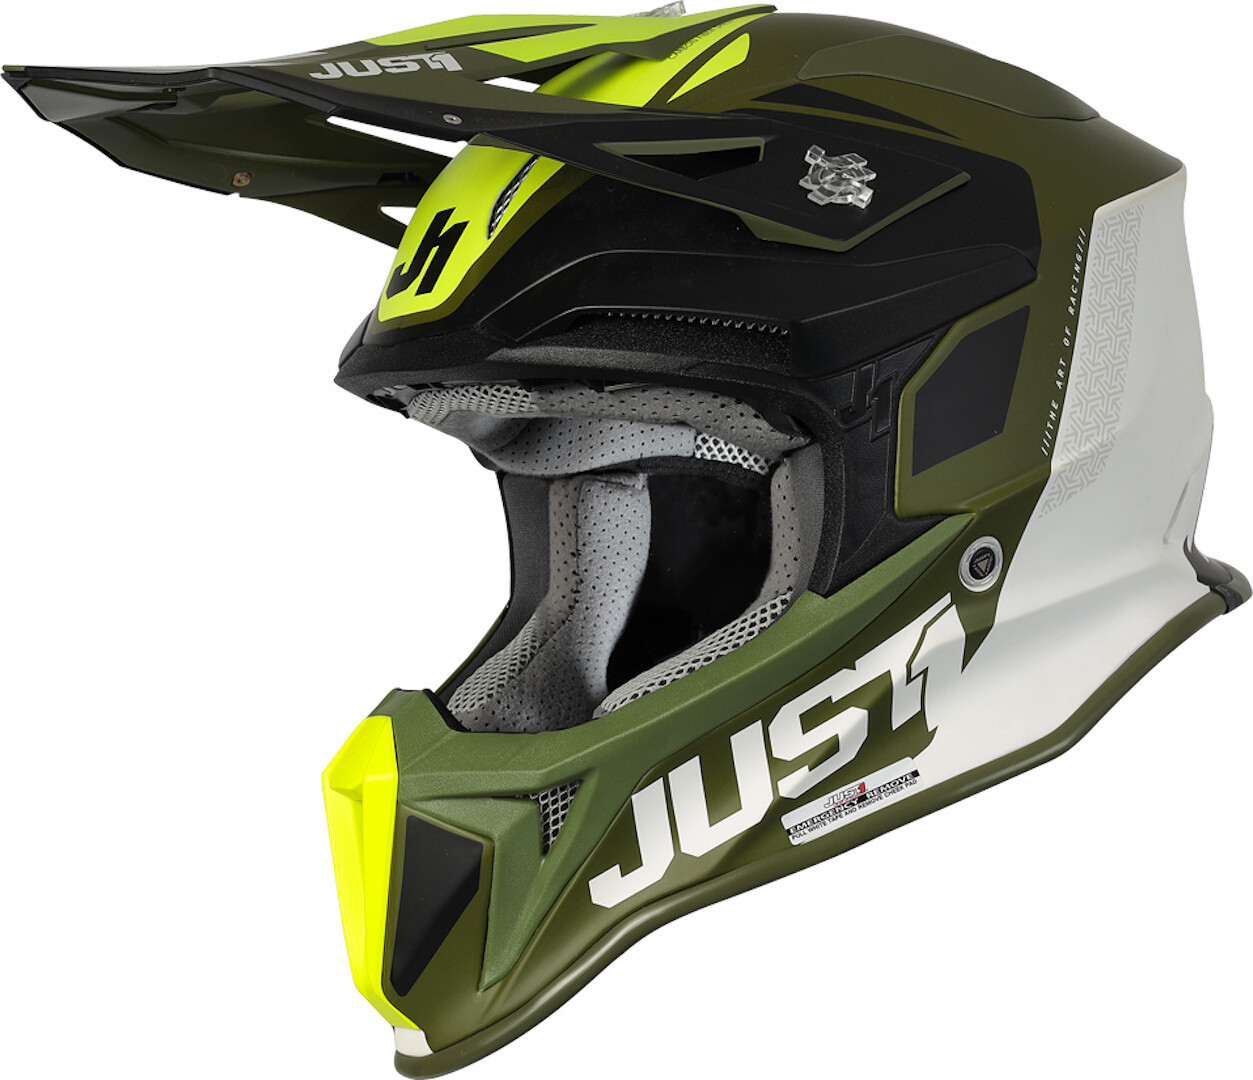 Image of Just1 J18 Pulsar Army Limited Edition MIPS Casco motocross, verde, dimensione M